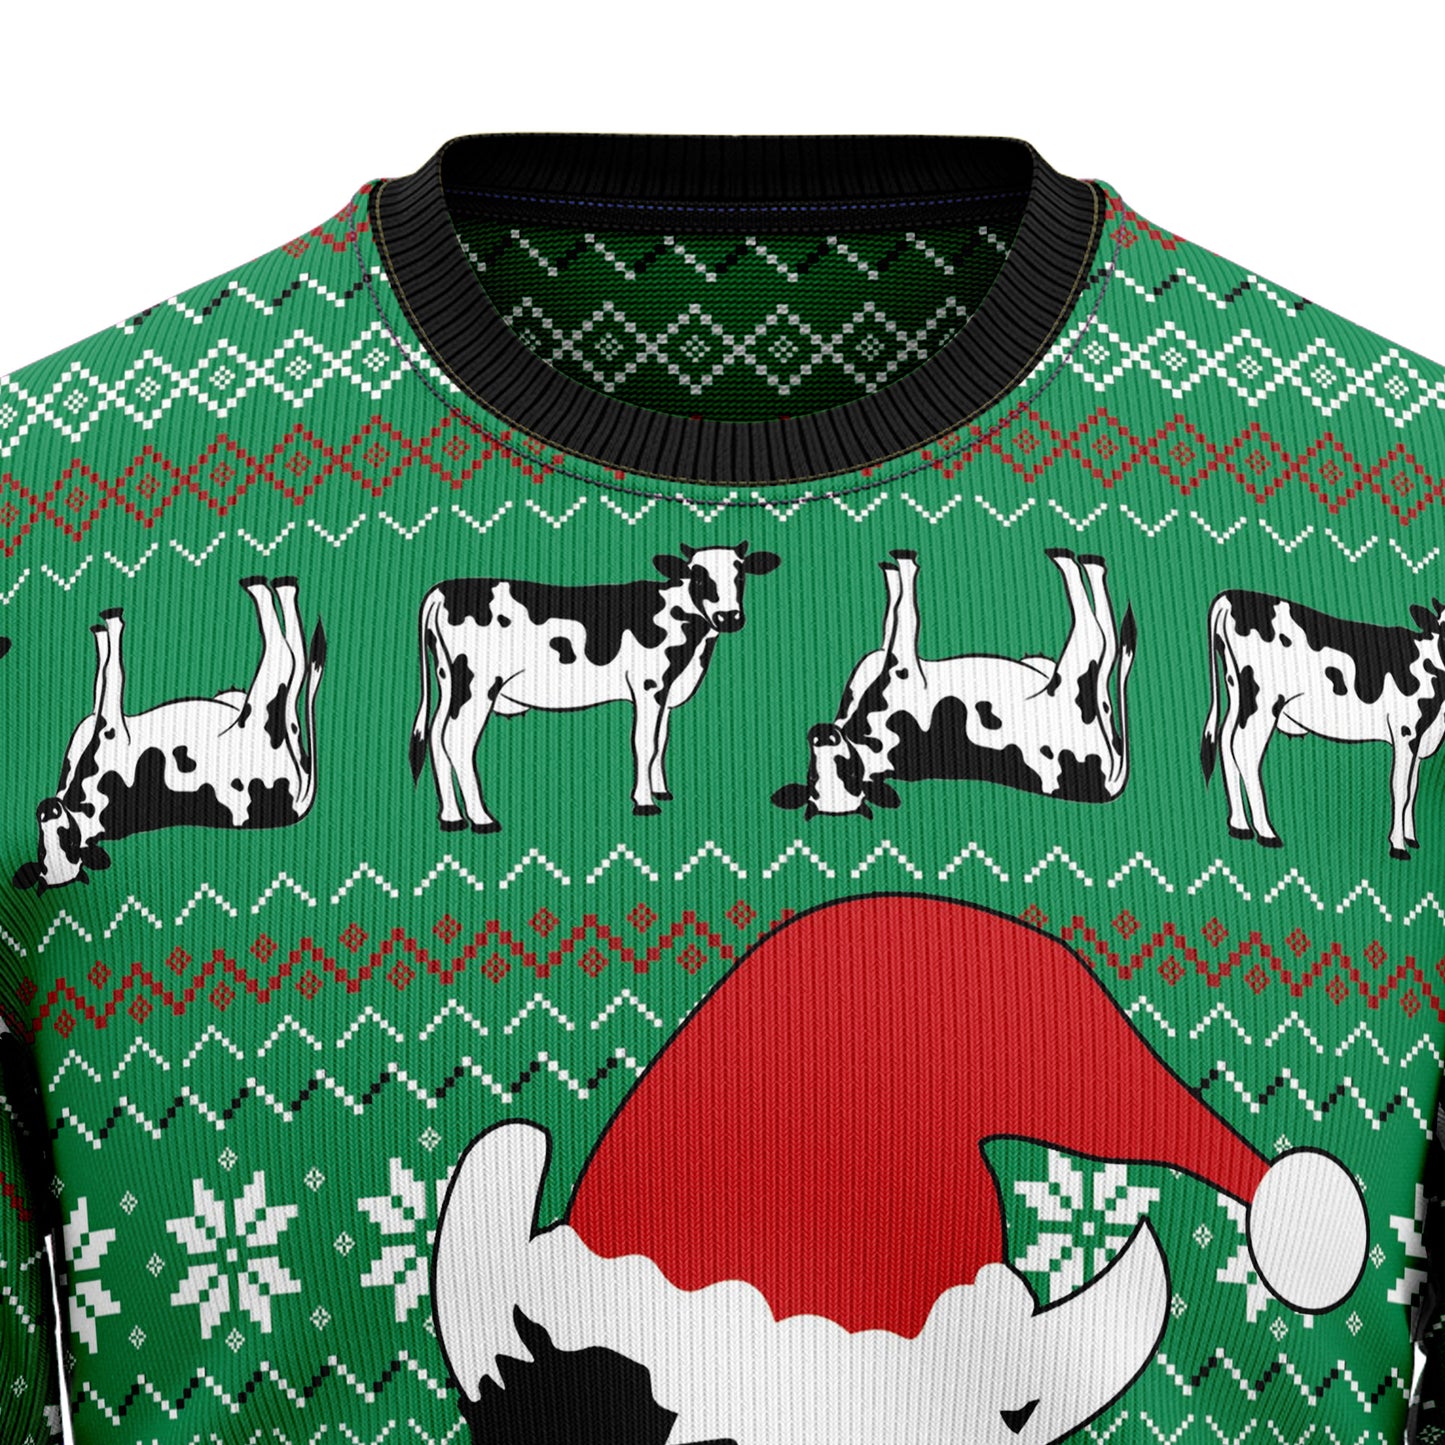 Funny Cow G5930 Ugly Christmas Sweater